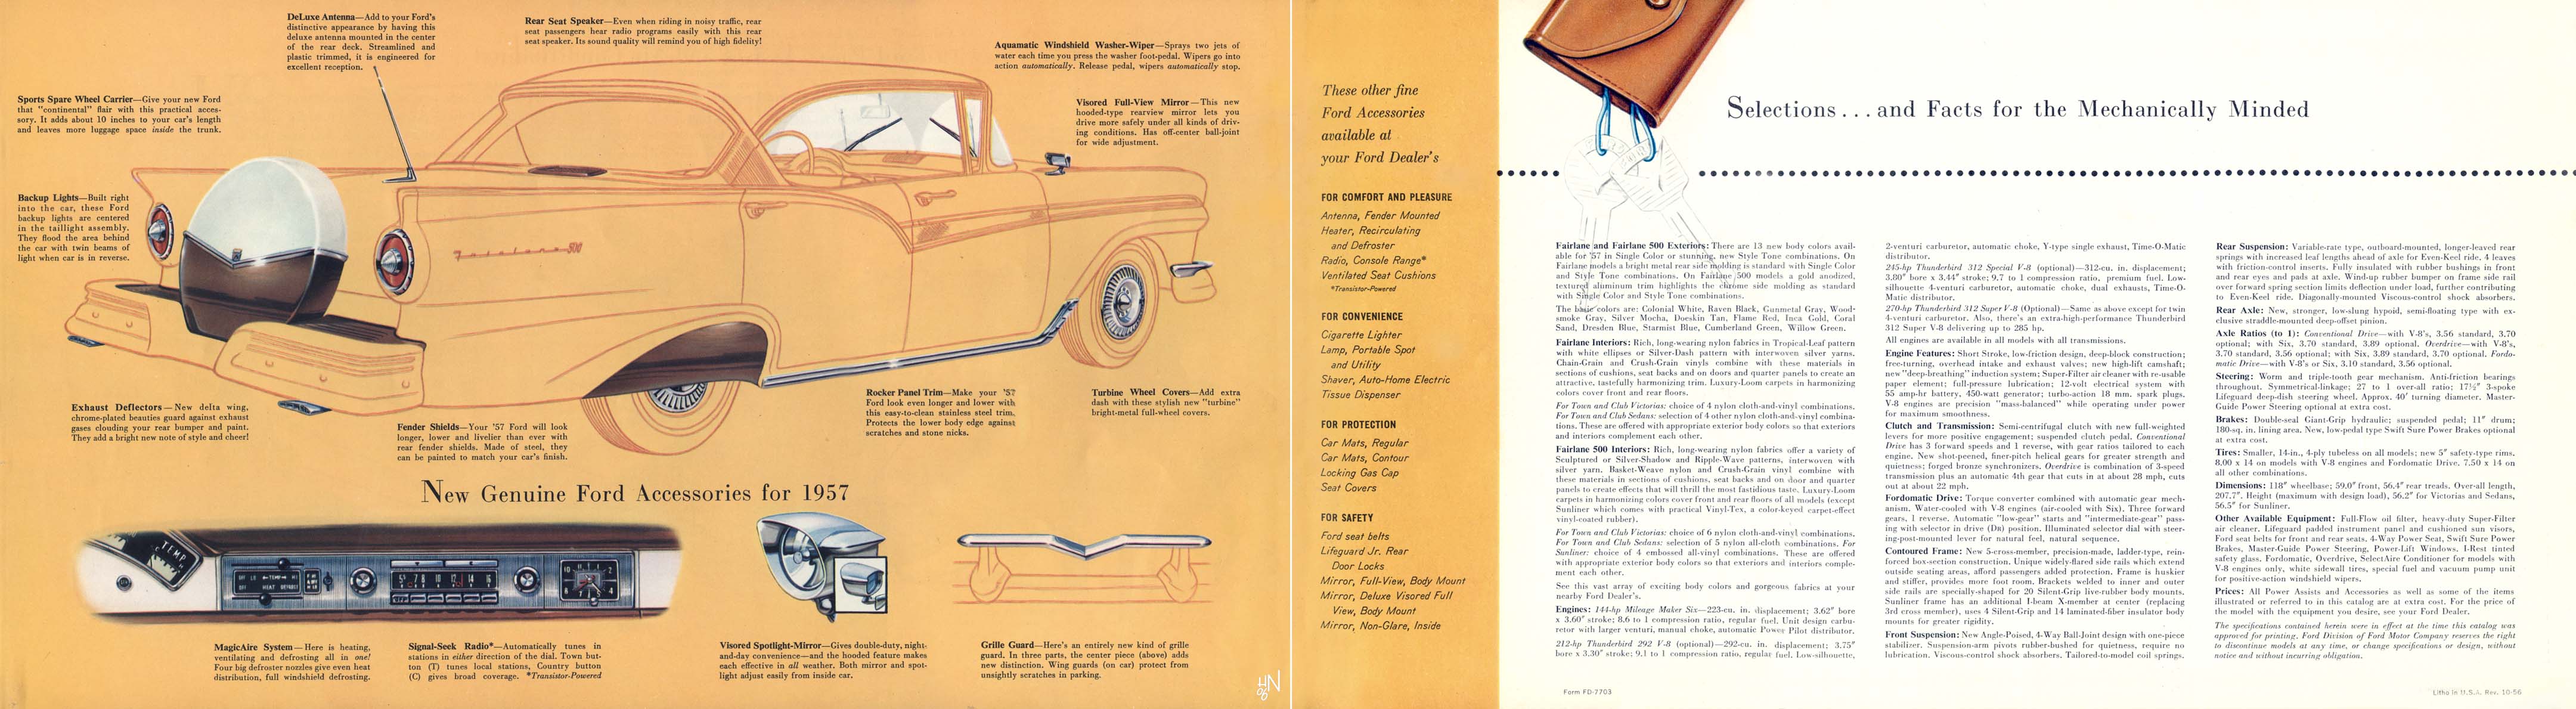 1957 Ford Fairlane Brochure Page 4